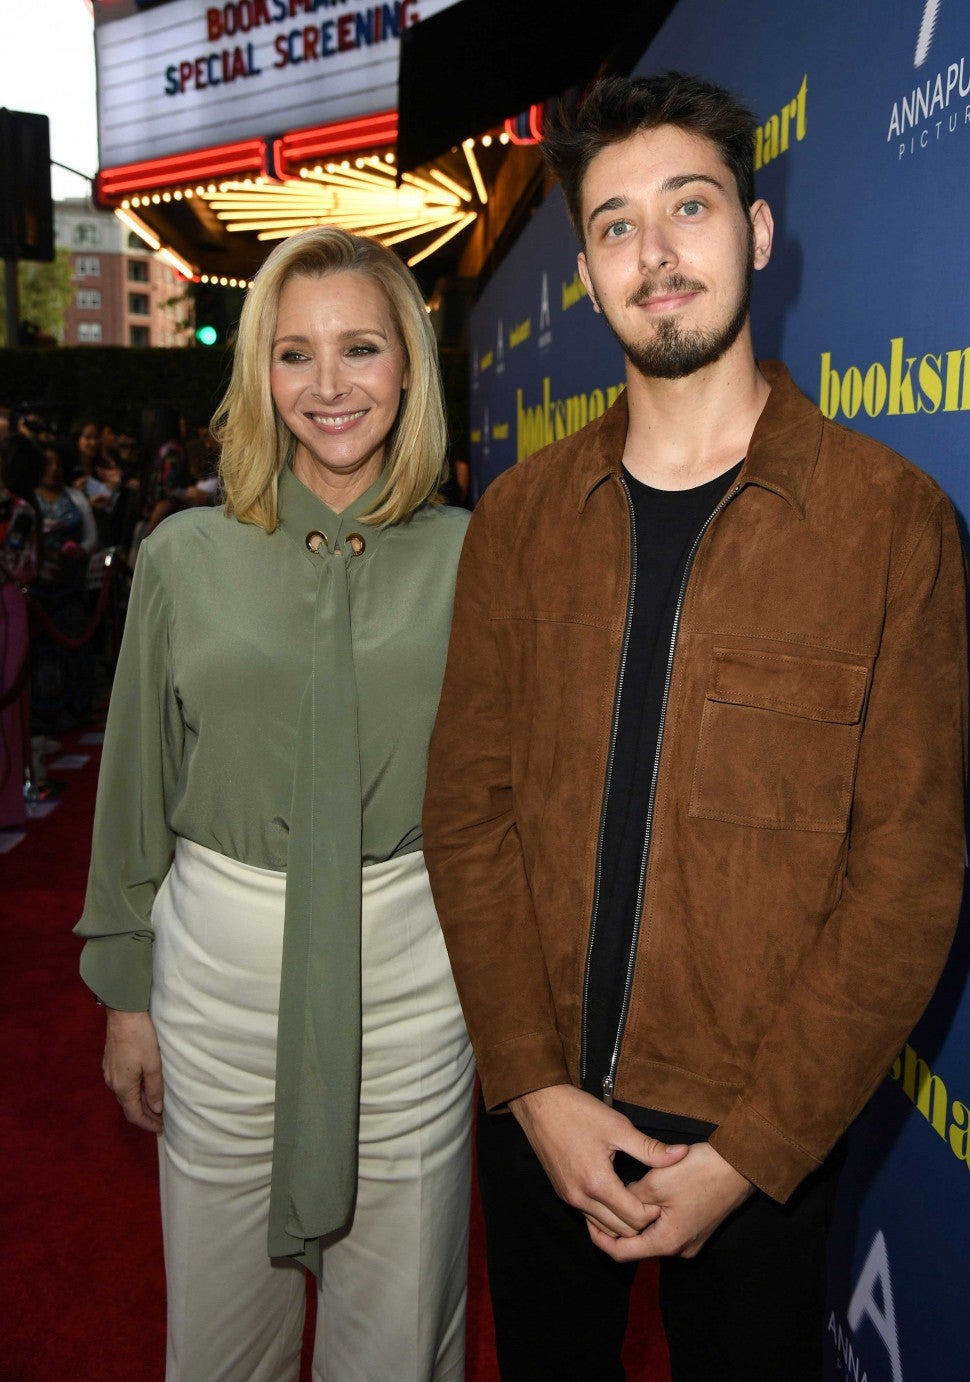 Lisa Kudrow and son Julian Murray Stern at a screening of Booksmart in LA on May 13